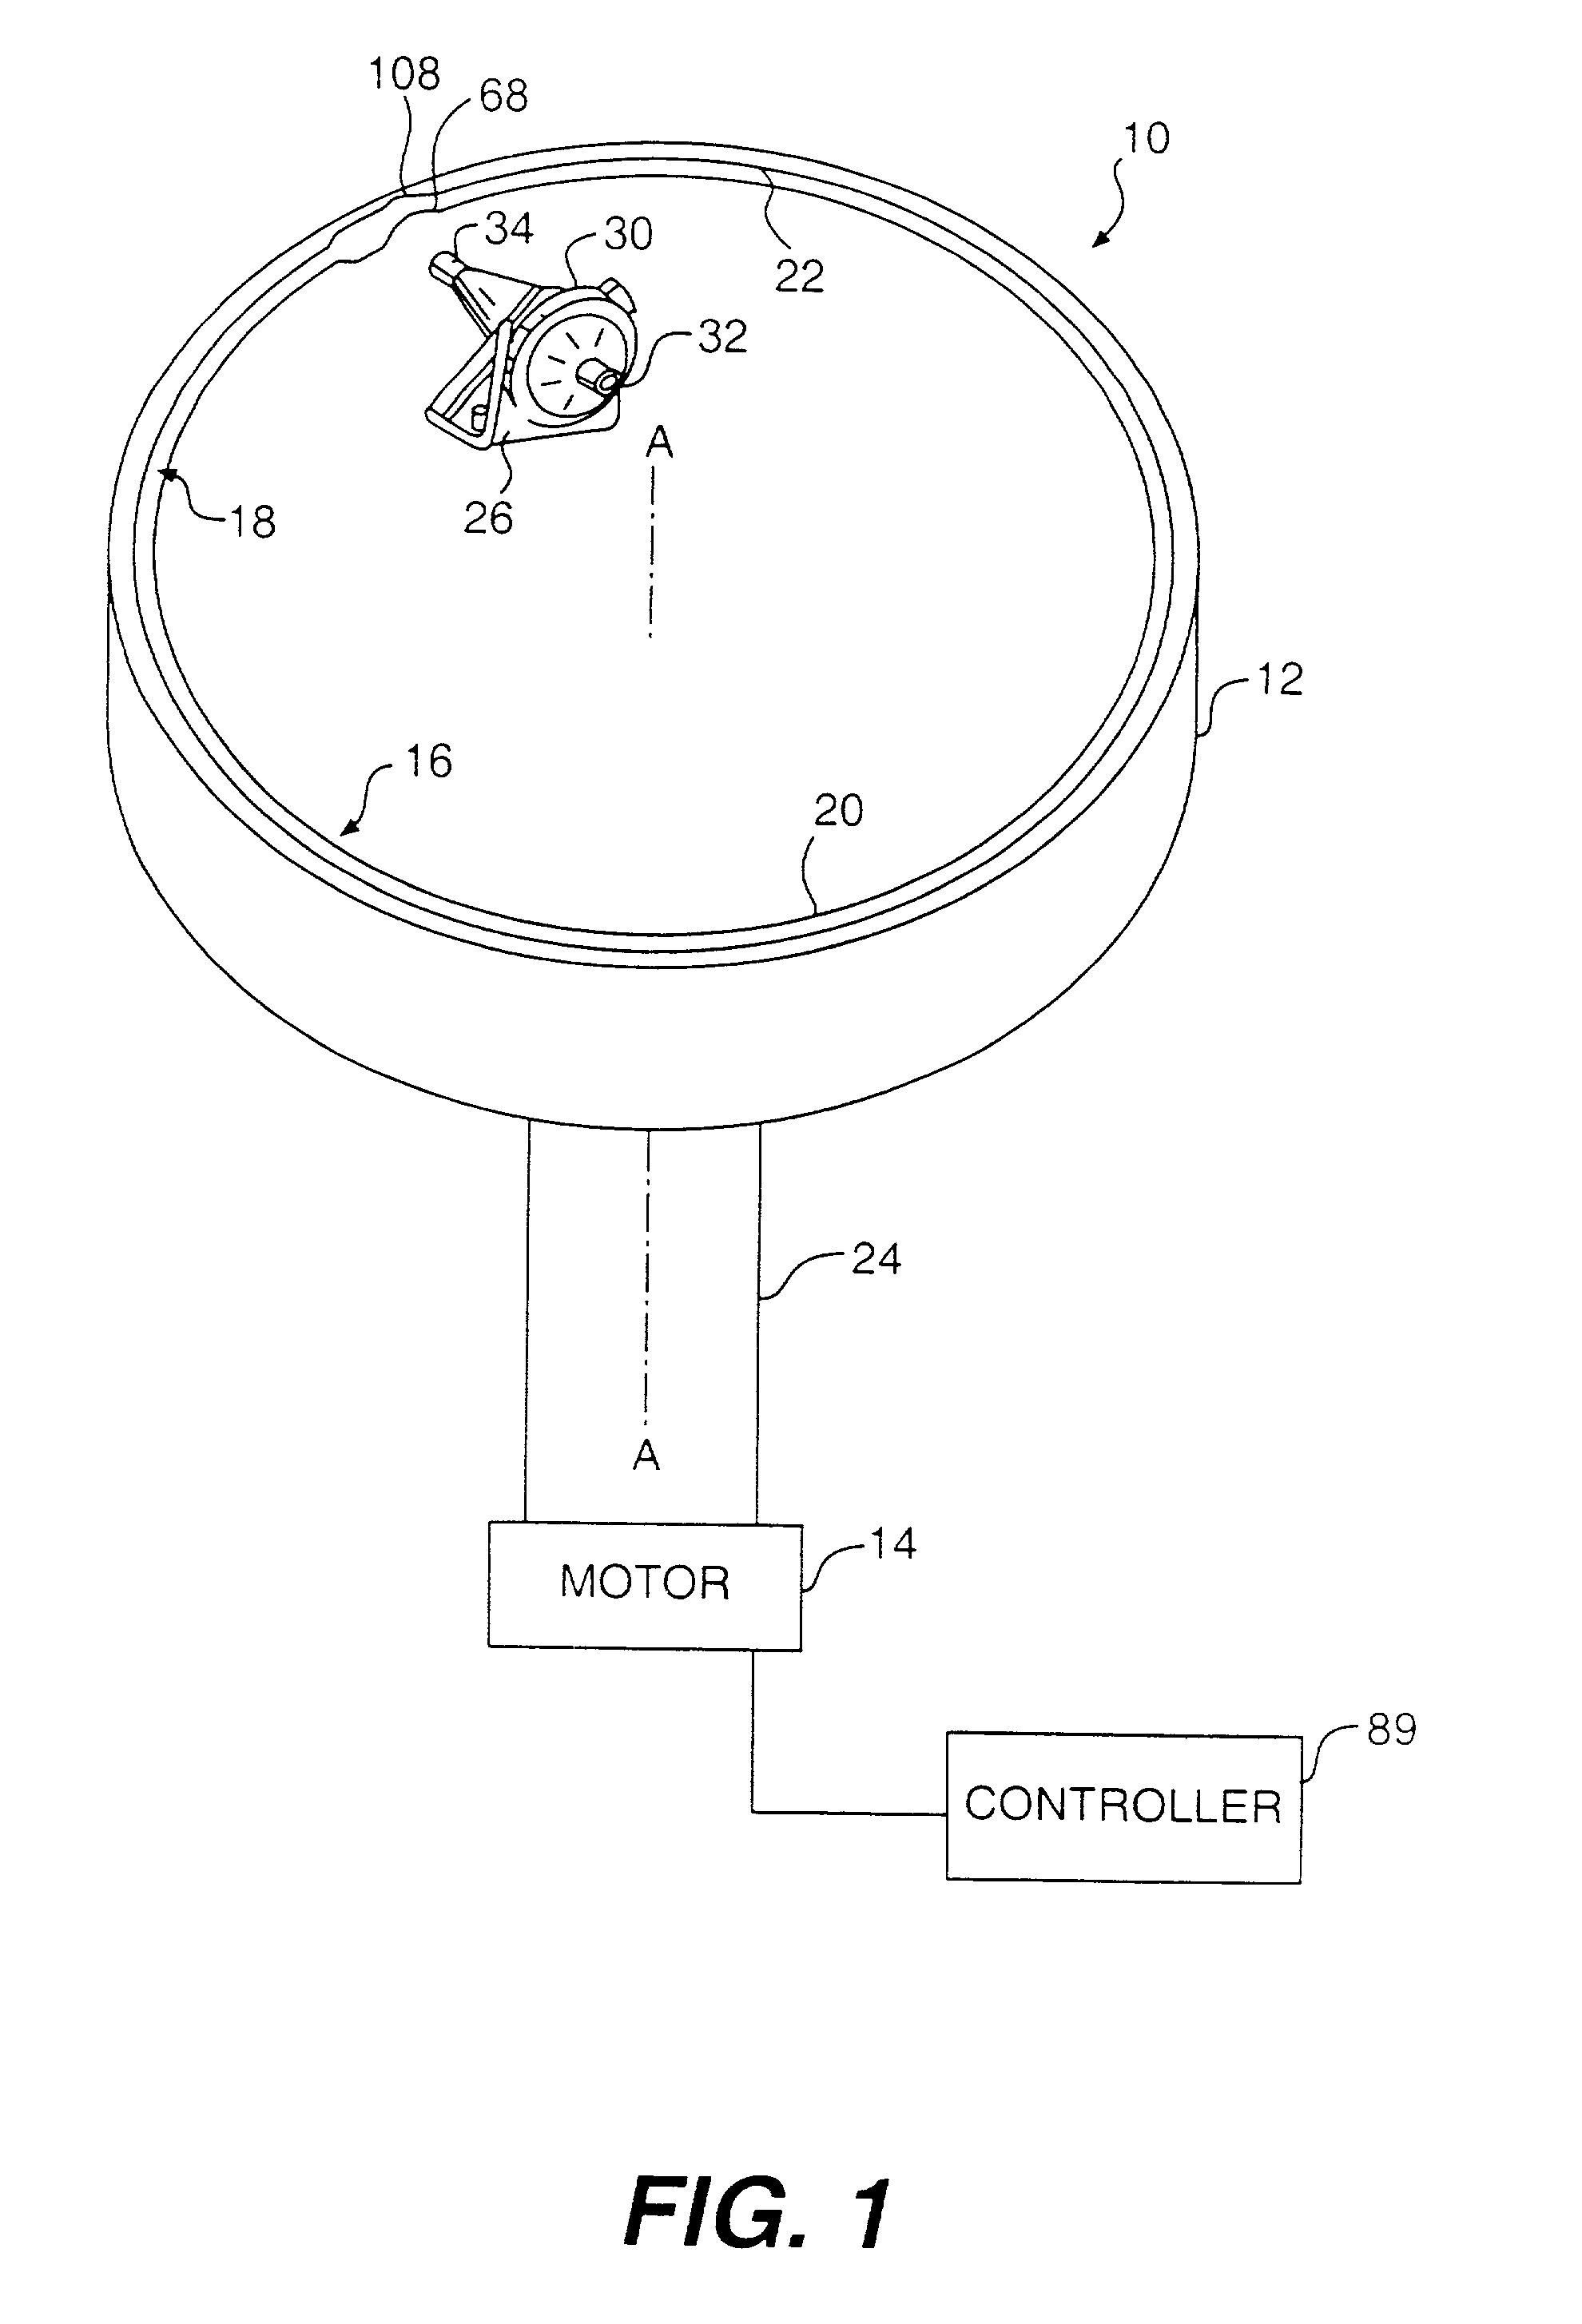 Centrifugal separation apparatus and method for separating fluid components